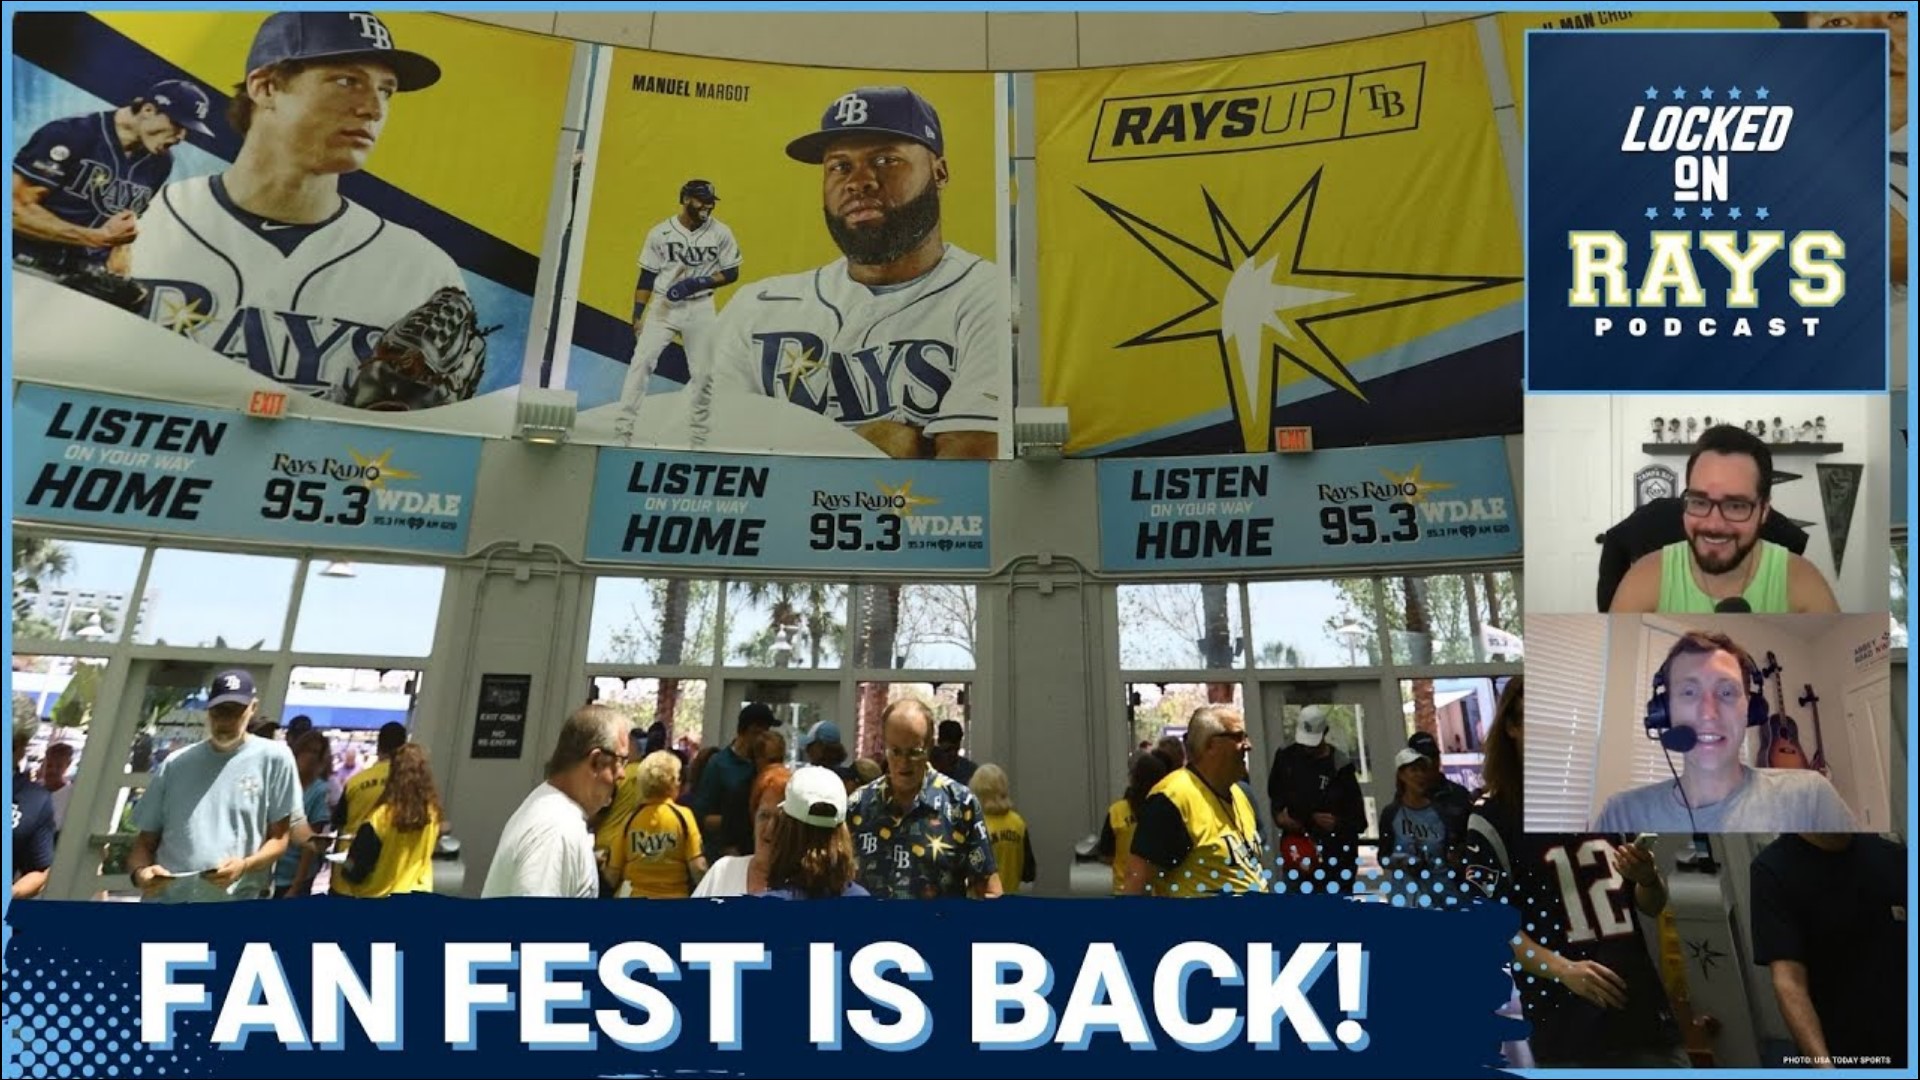 Tampa Bay Rays fans will be making their way to Tropicana Field on Saturday, Feb. 18, as the Rays will be hosting their first Fan Fest since early 2020.